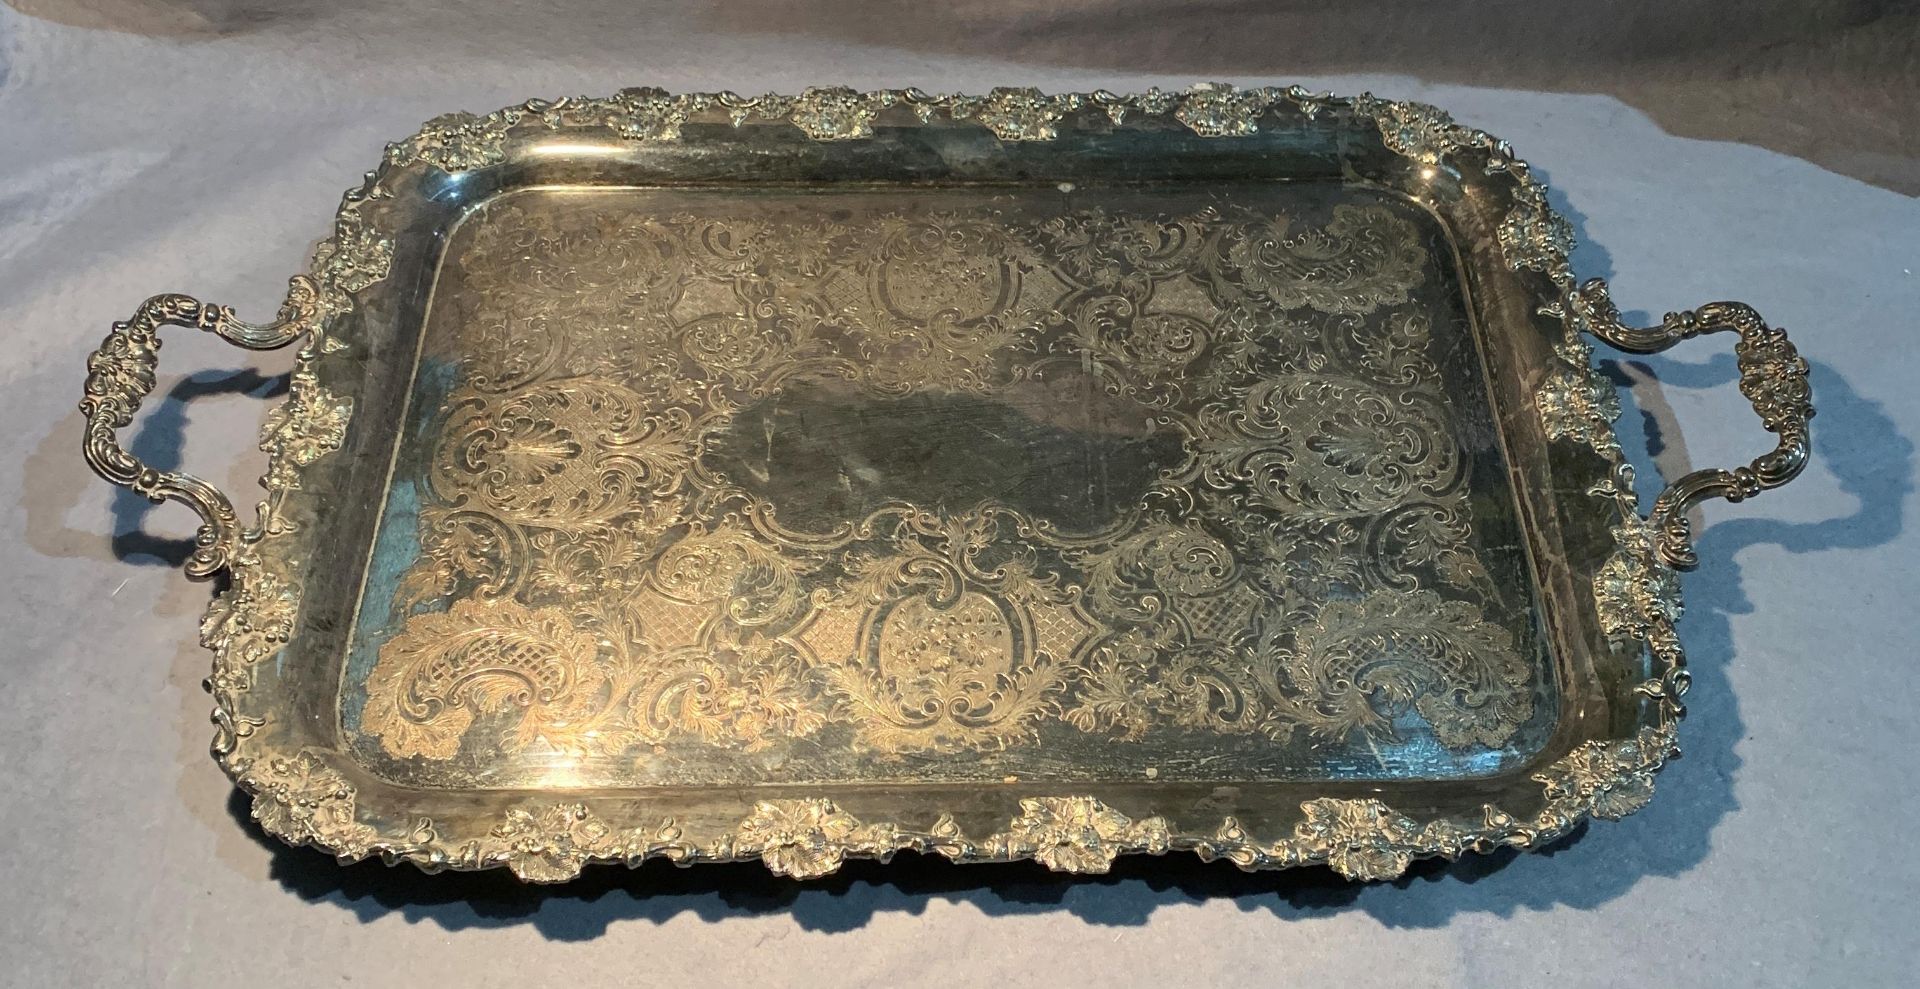 An engraved and decorated two handled silver plated tray, - Image 2 of 4